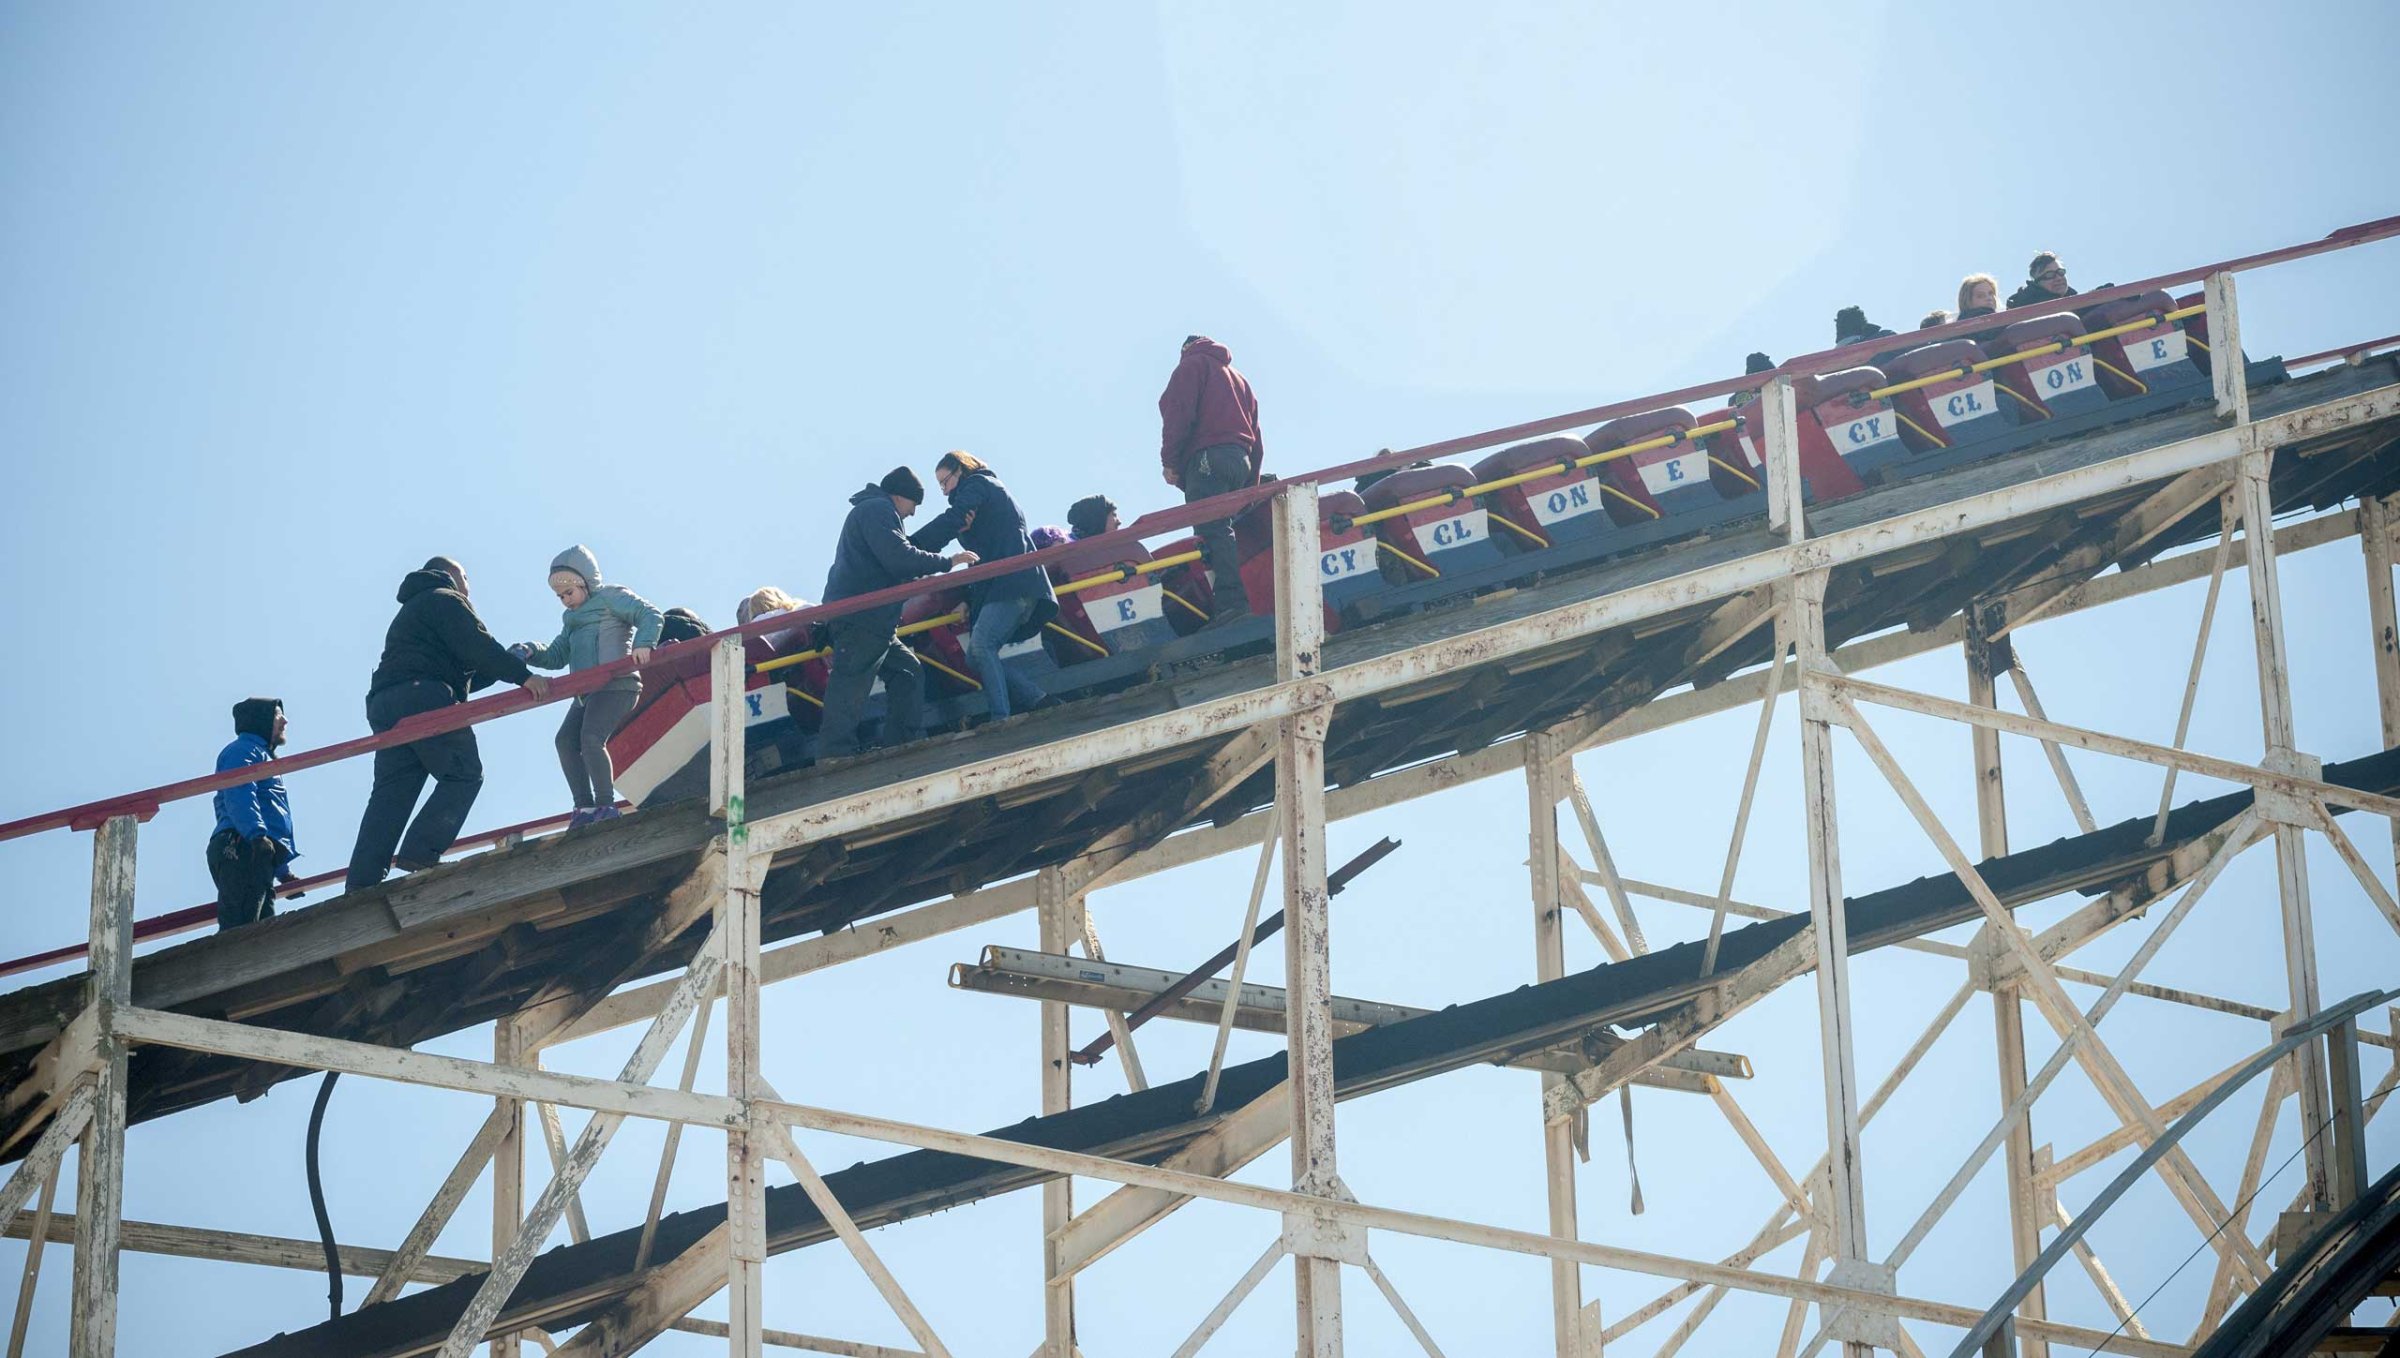 Workers assist thrill seekers on the Luna Park Coney Island Cyclone roller coaster after it got stuck on its inaugural run of the Summer 2015 season, on March 29, 2015 in Brooklyn, N.Y.